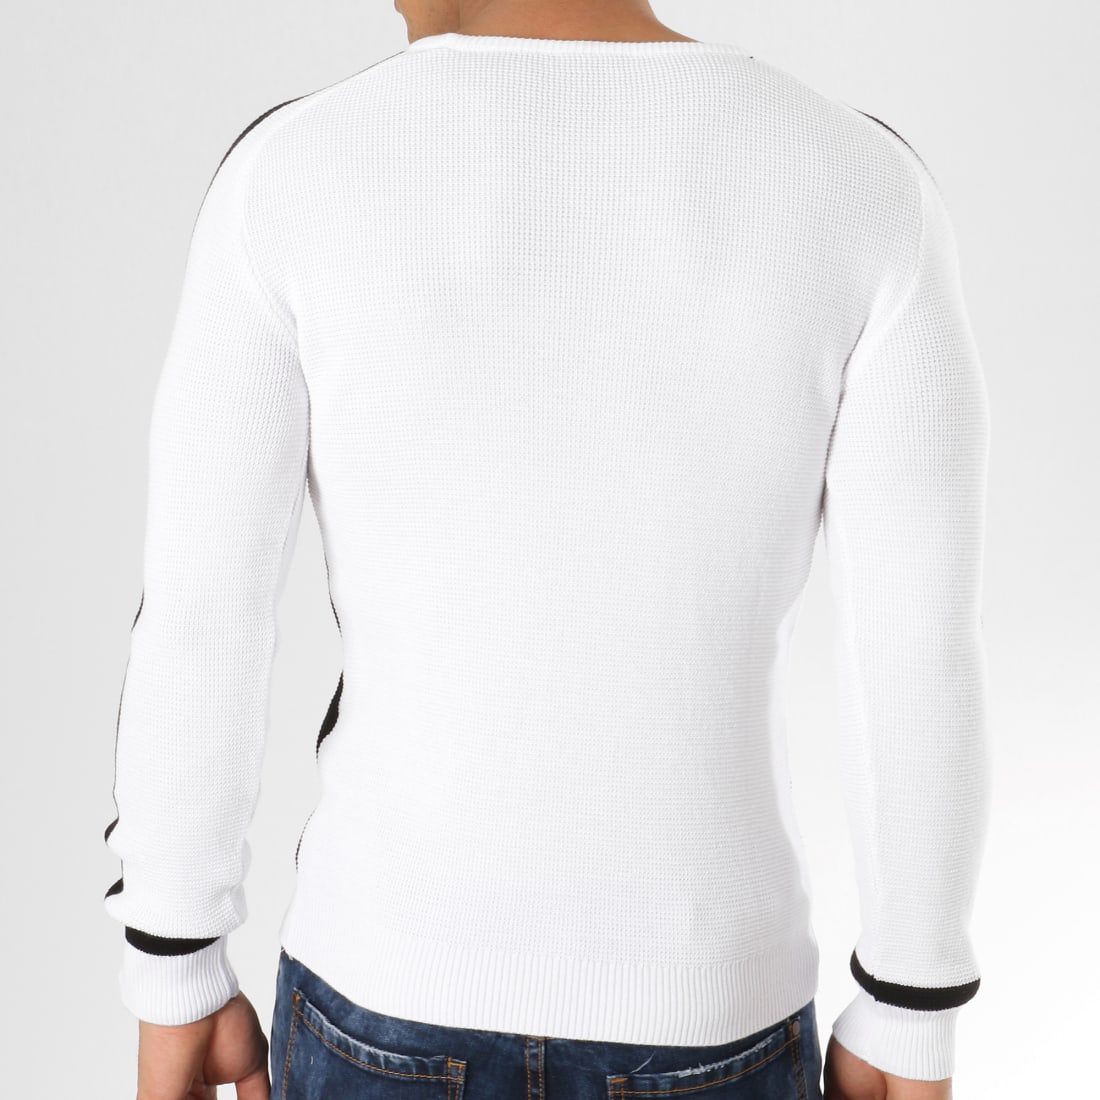 Pull COL ROND ZW002 Blanc - JOHN H -HOMME